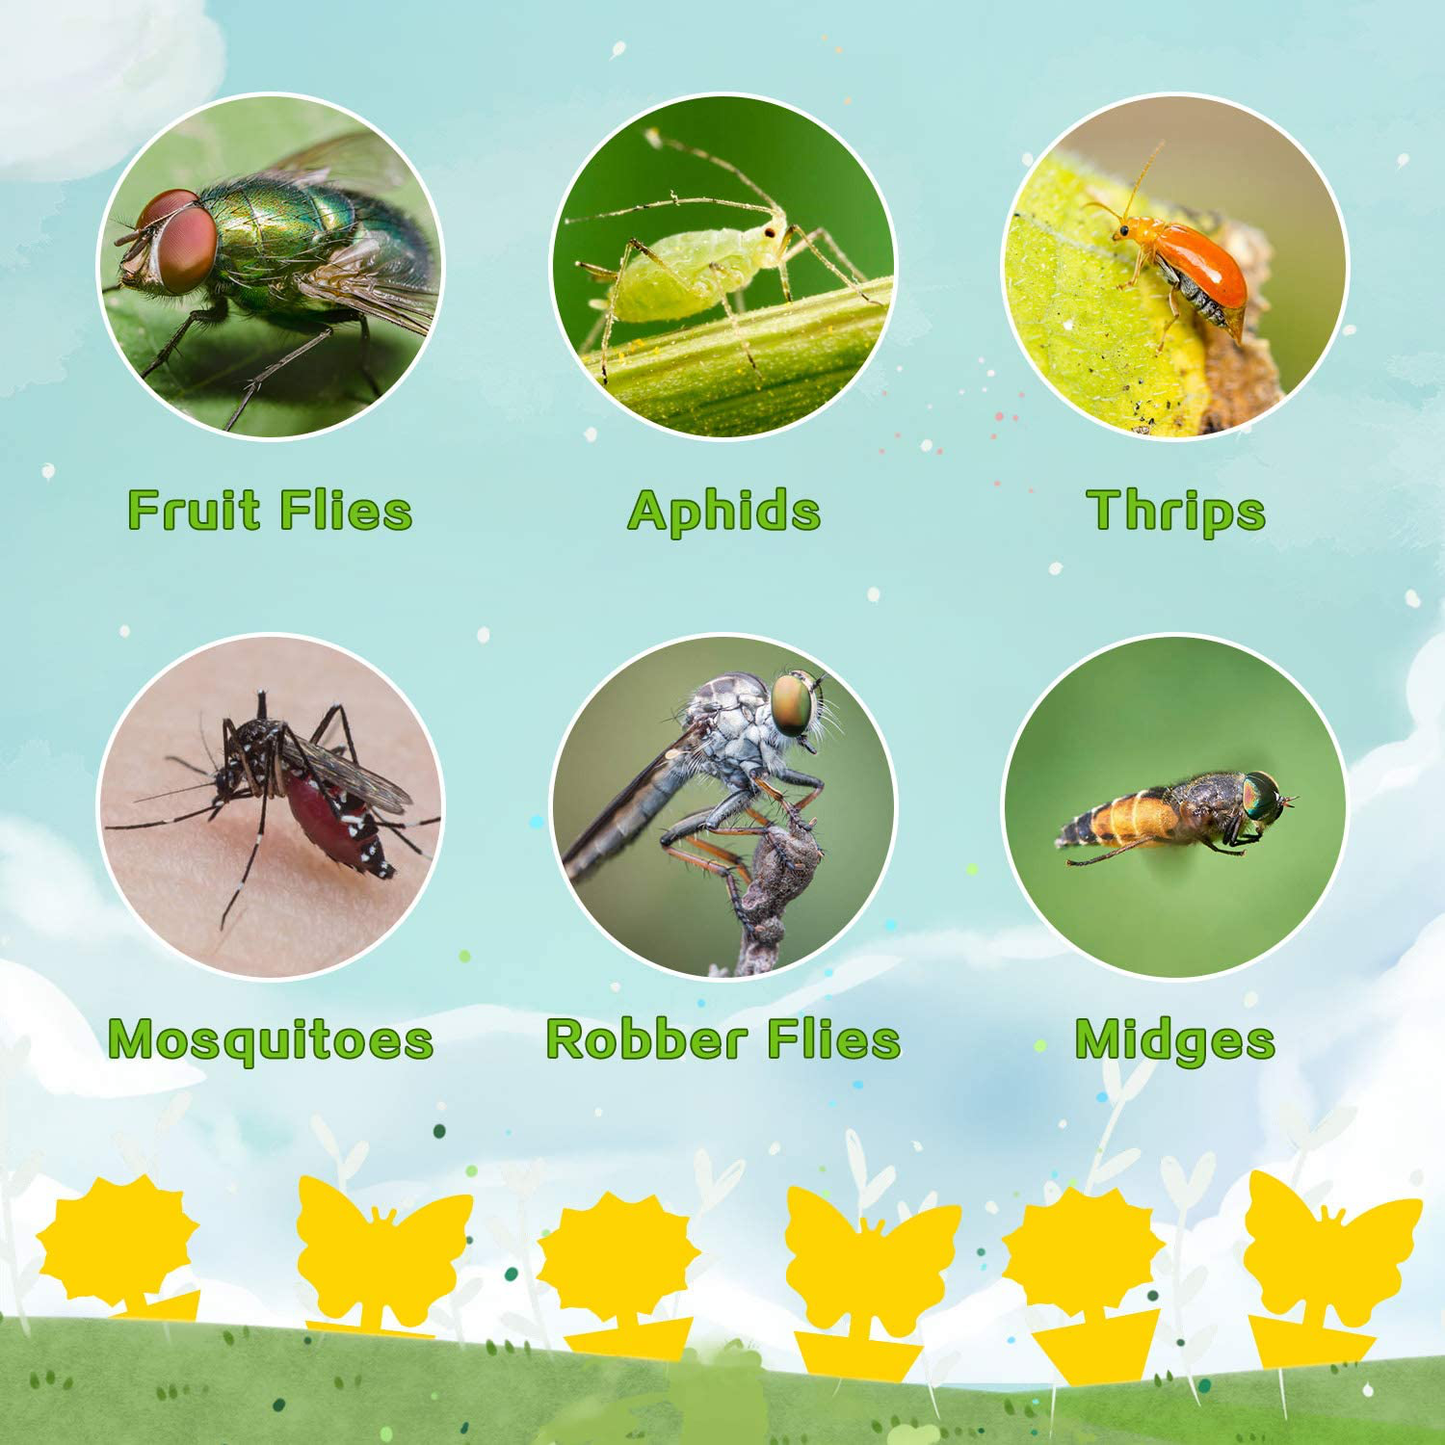 36PCS Fruit Fly Sticky Traps Fungus Gnat Traps Insect Trap for Plants Kitchen Indoor Outdoor White Flies Mosquitos Fungus Gnats Flying Insects Houseplant Gift